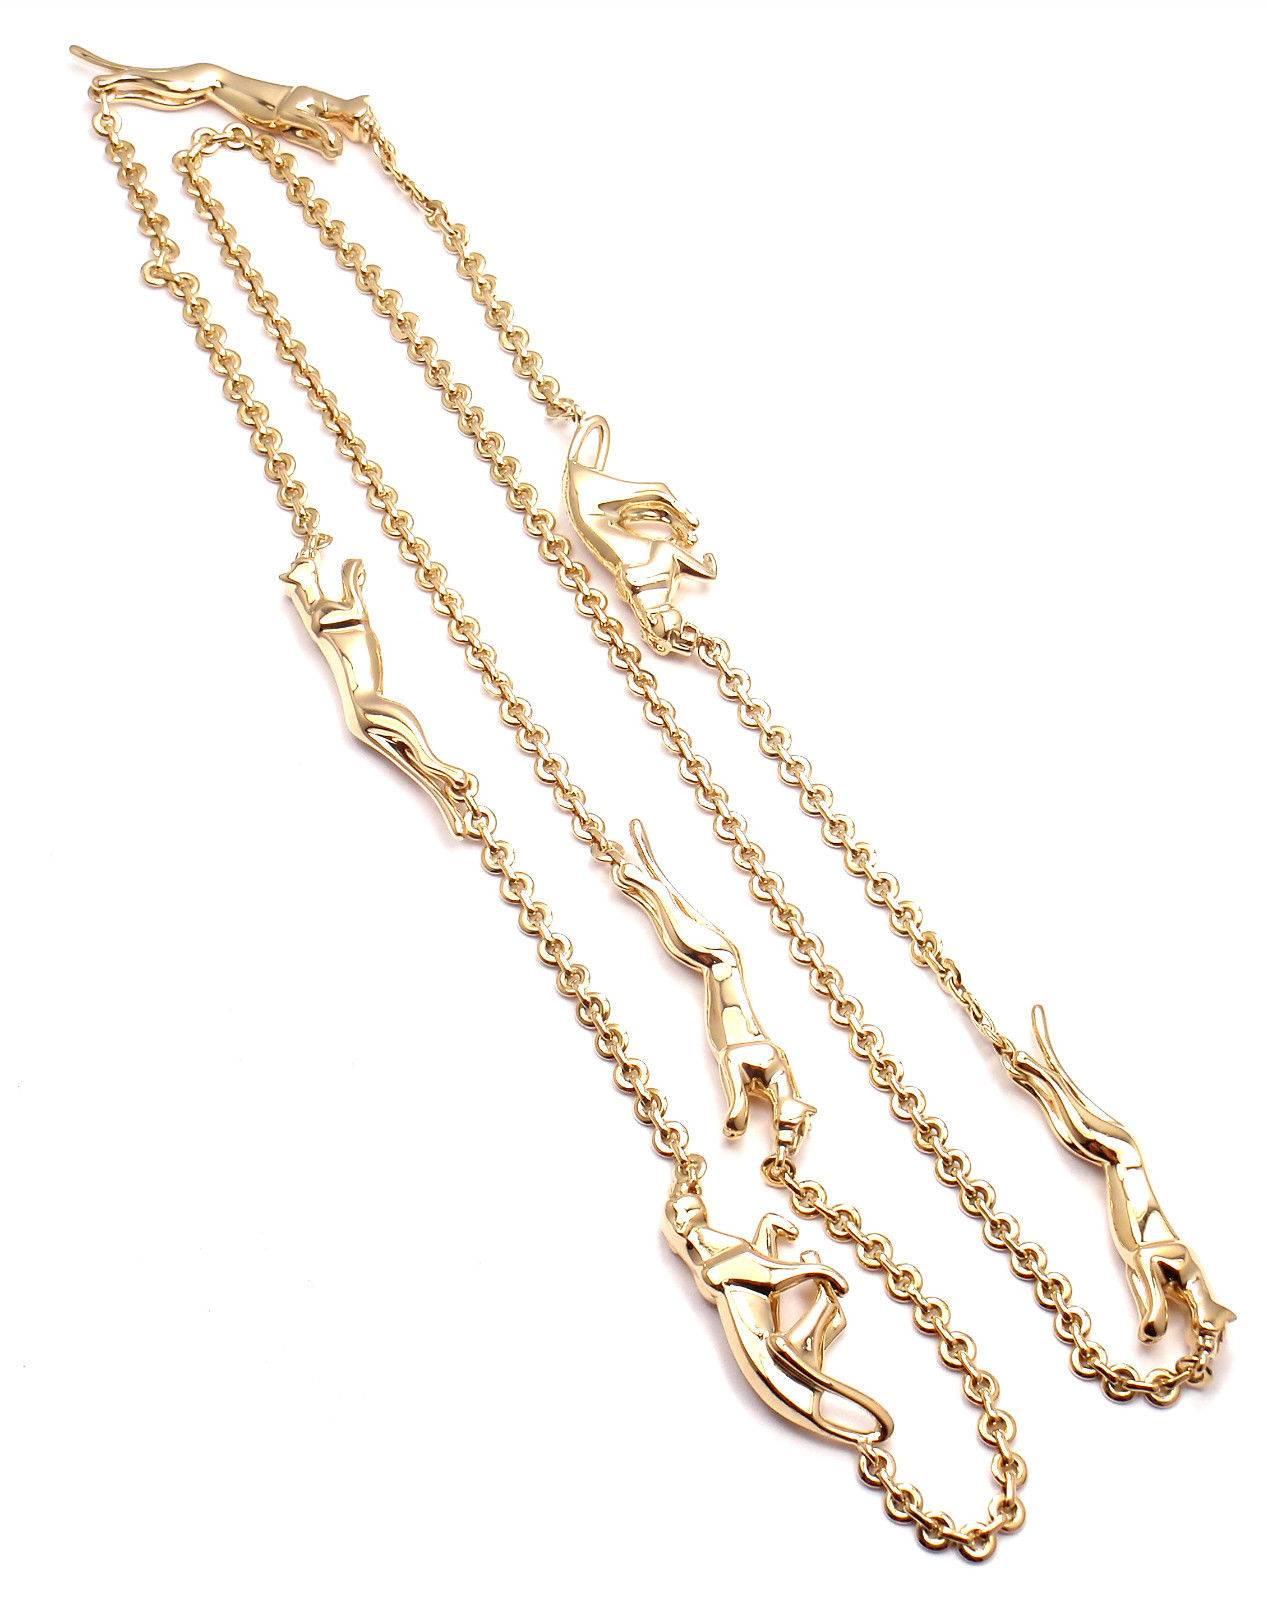 Women's or Men's Cartier 6 Panther Panthere Long Link Yellow Gold Necklace